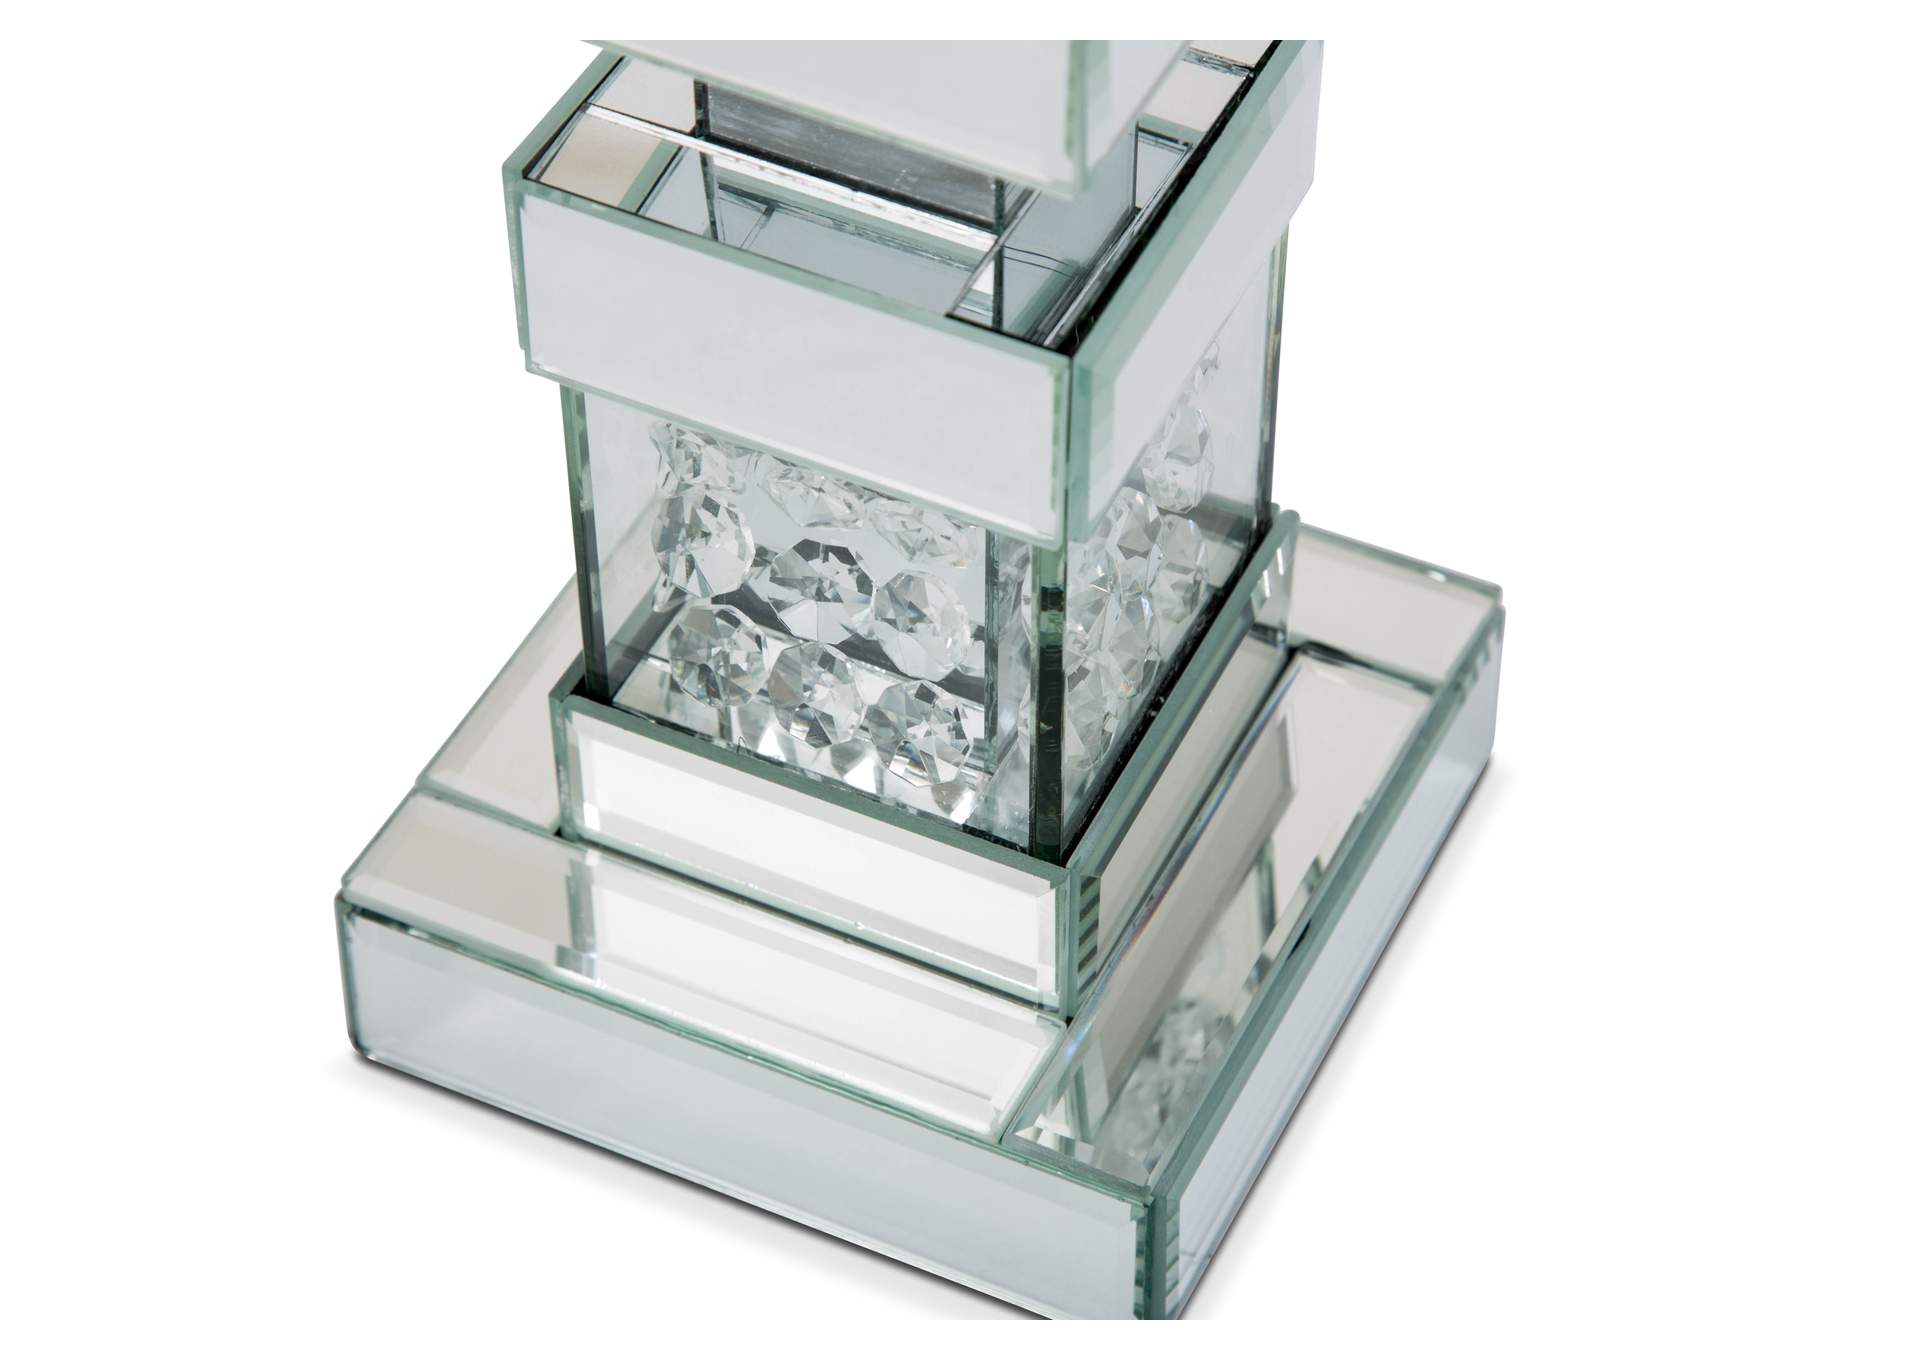 Montreal Mirrored/Crystal Candle Holder,Tall,-Pack/2,Michael Amini (AICO)